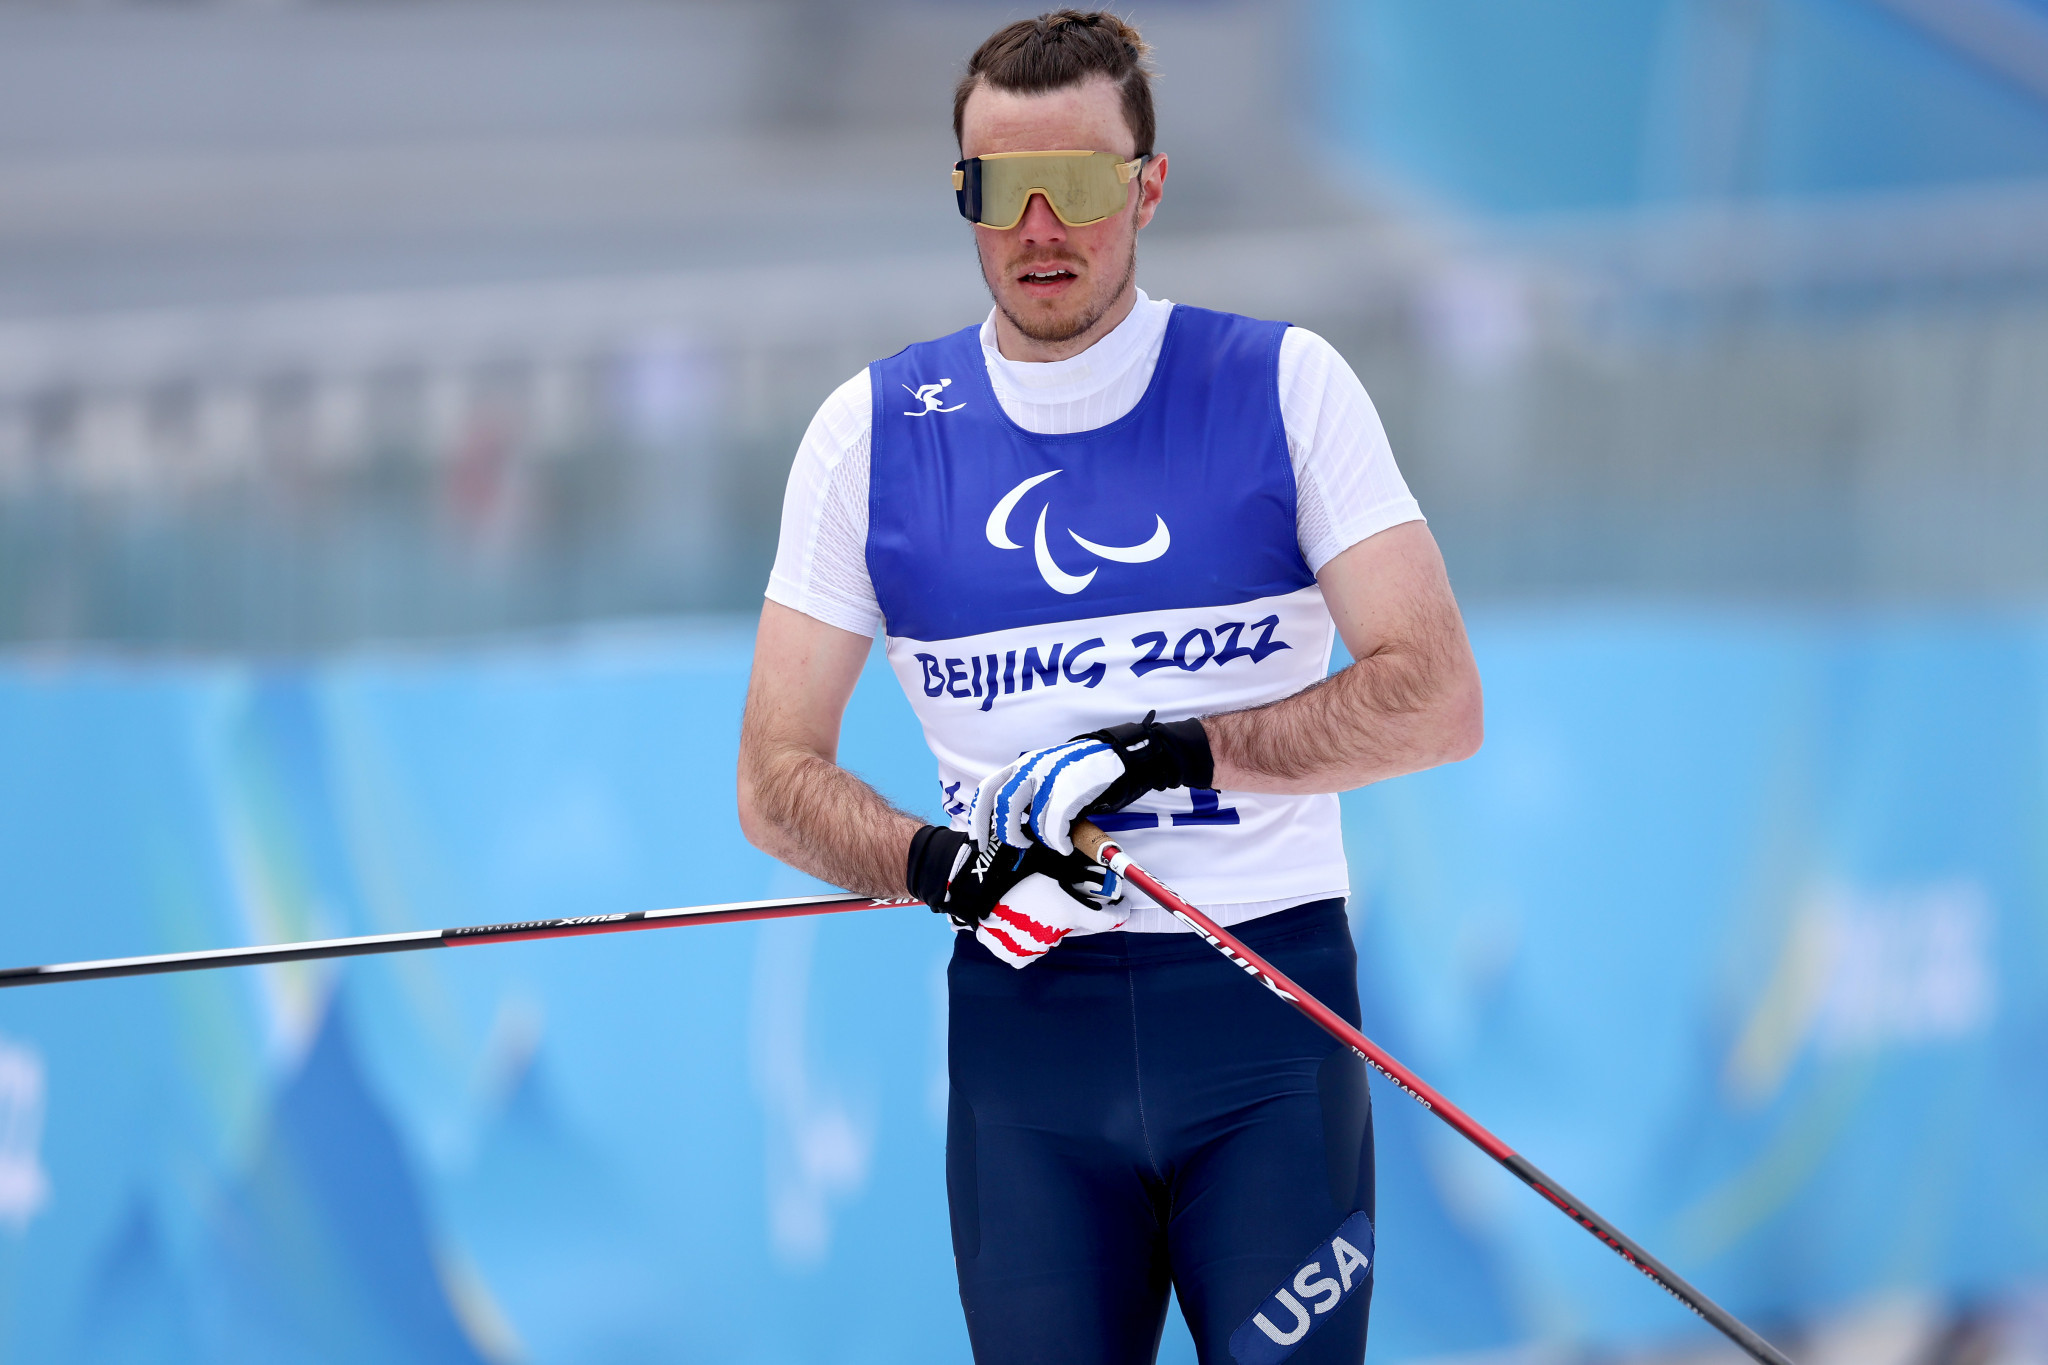 The United States' Jake Adicoff finished second in the men's sprint free vision impaired with a time of 3 minutes 20.3 seconds ©Getty Images